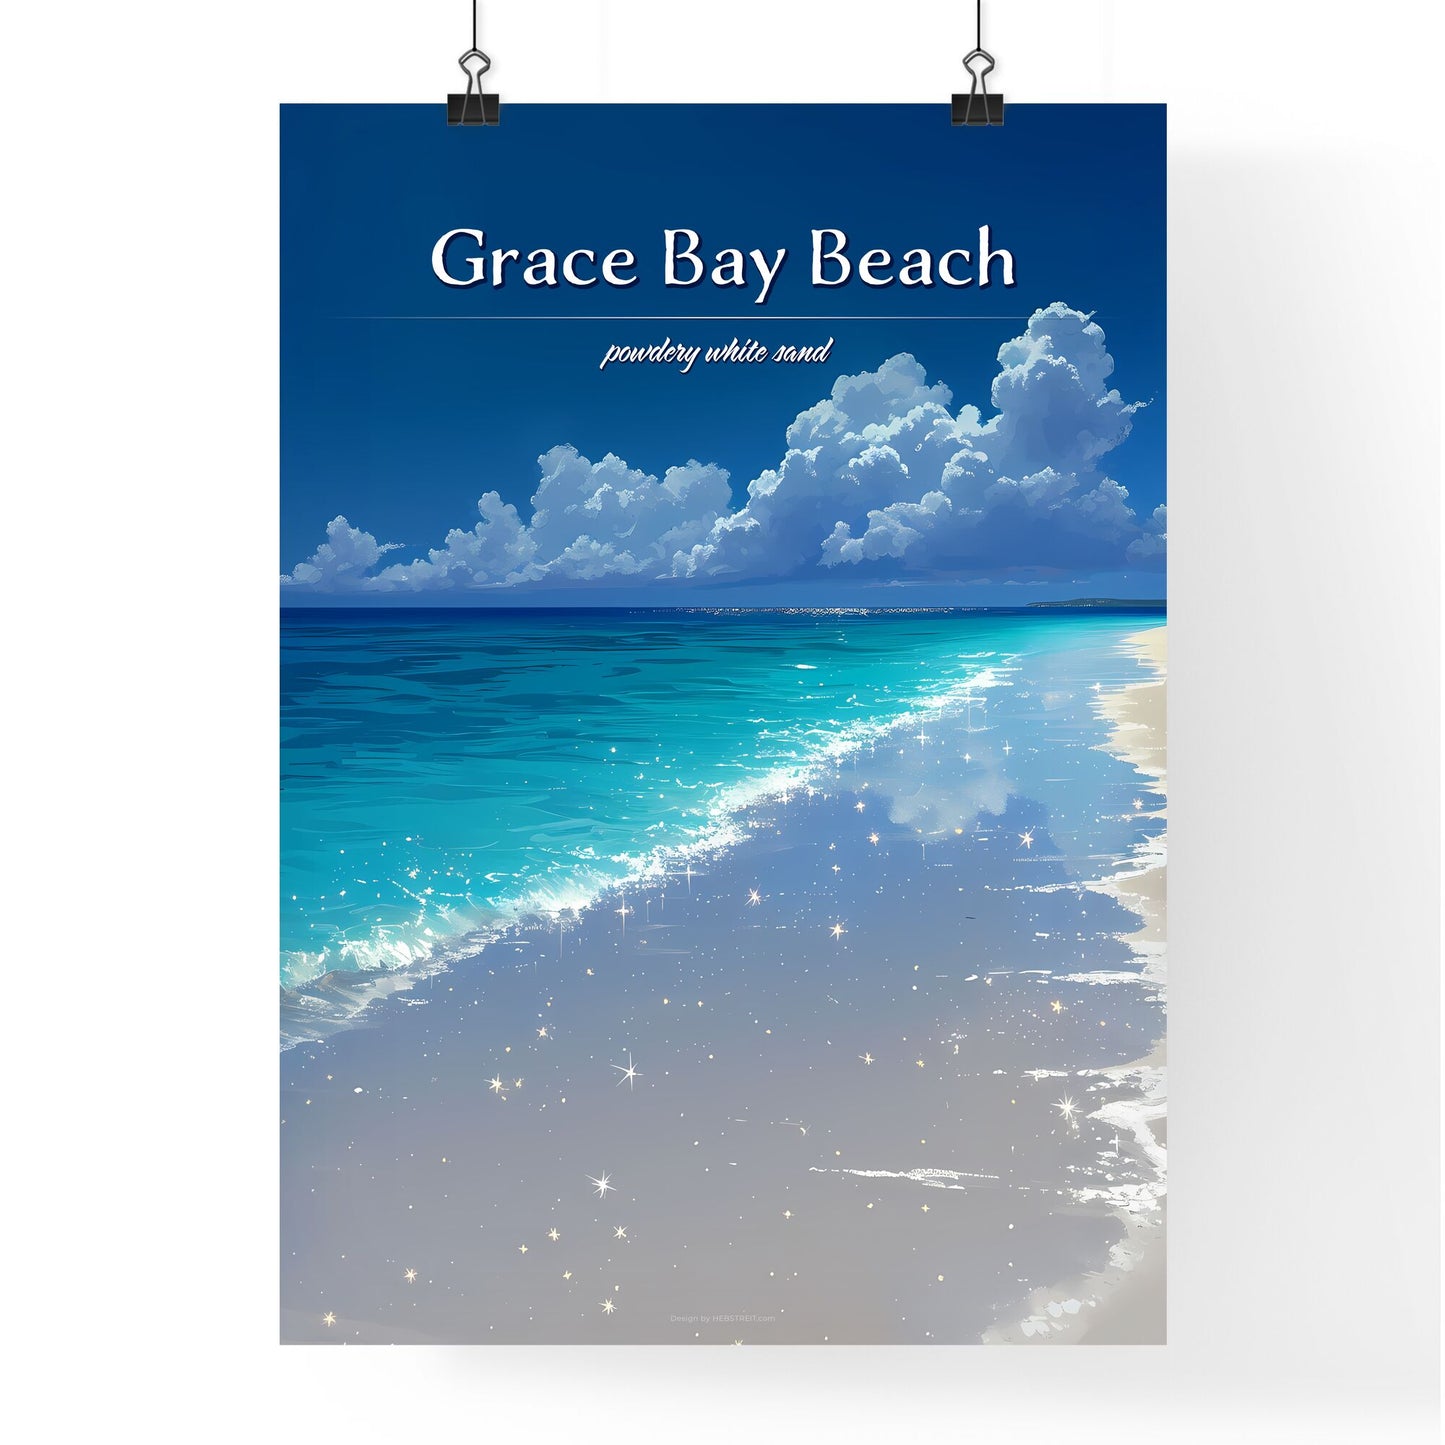 Grace Bay Beach - Art print of a beach with blue water and clouds Default Title